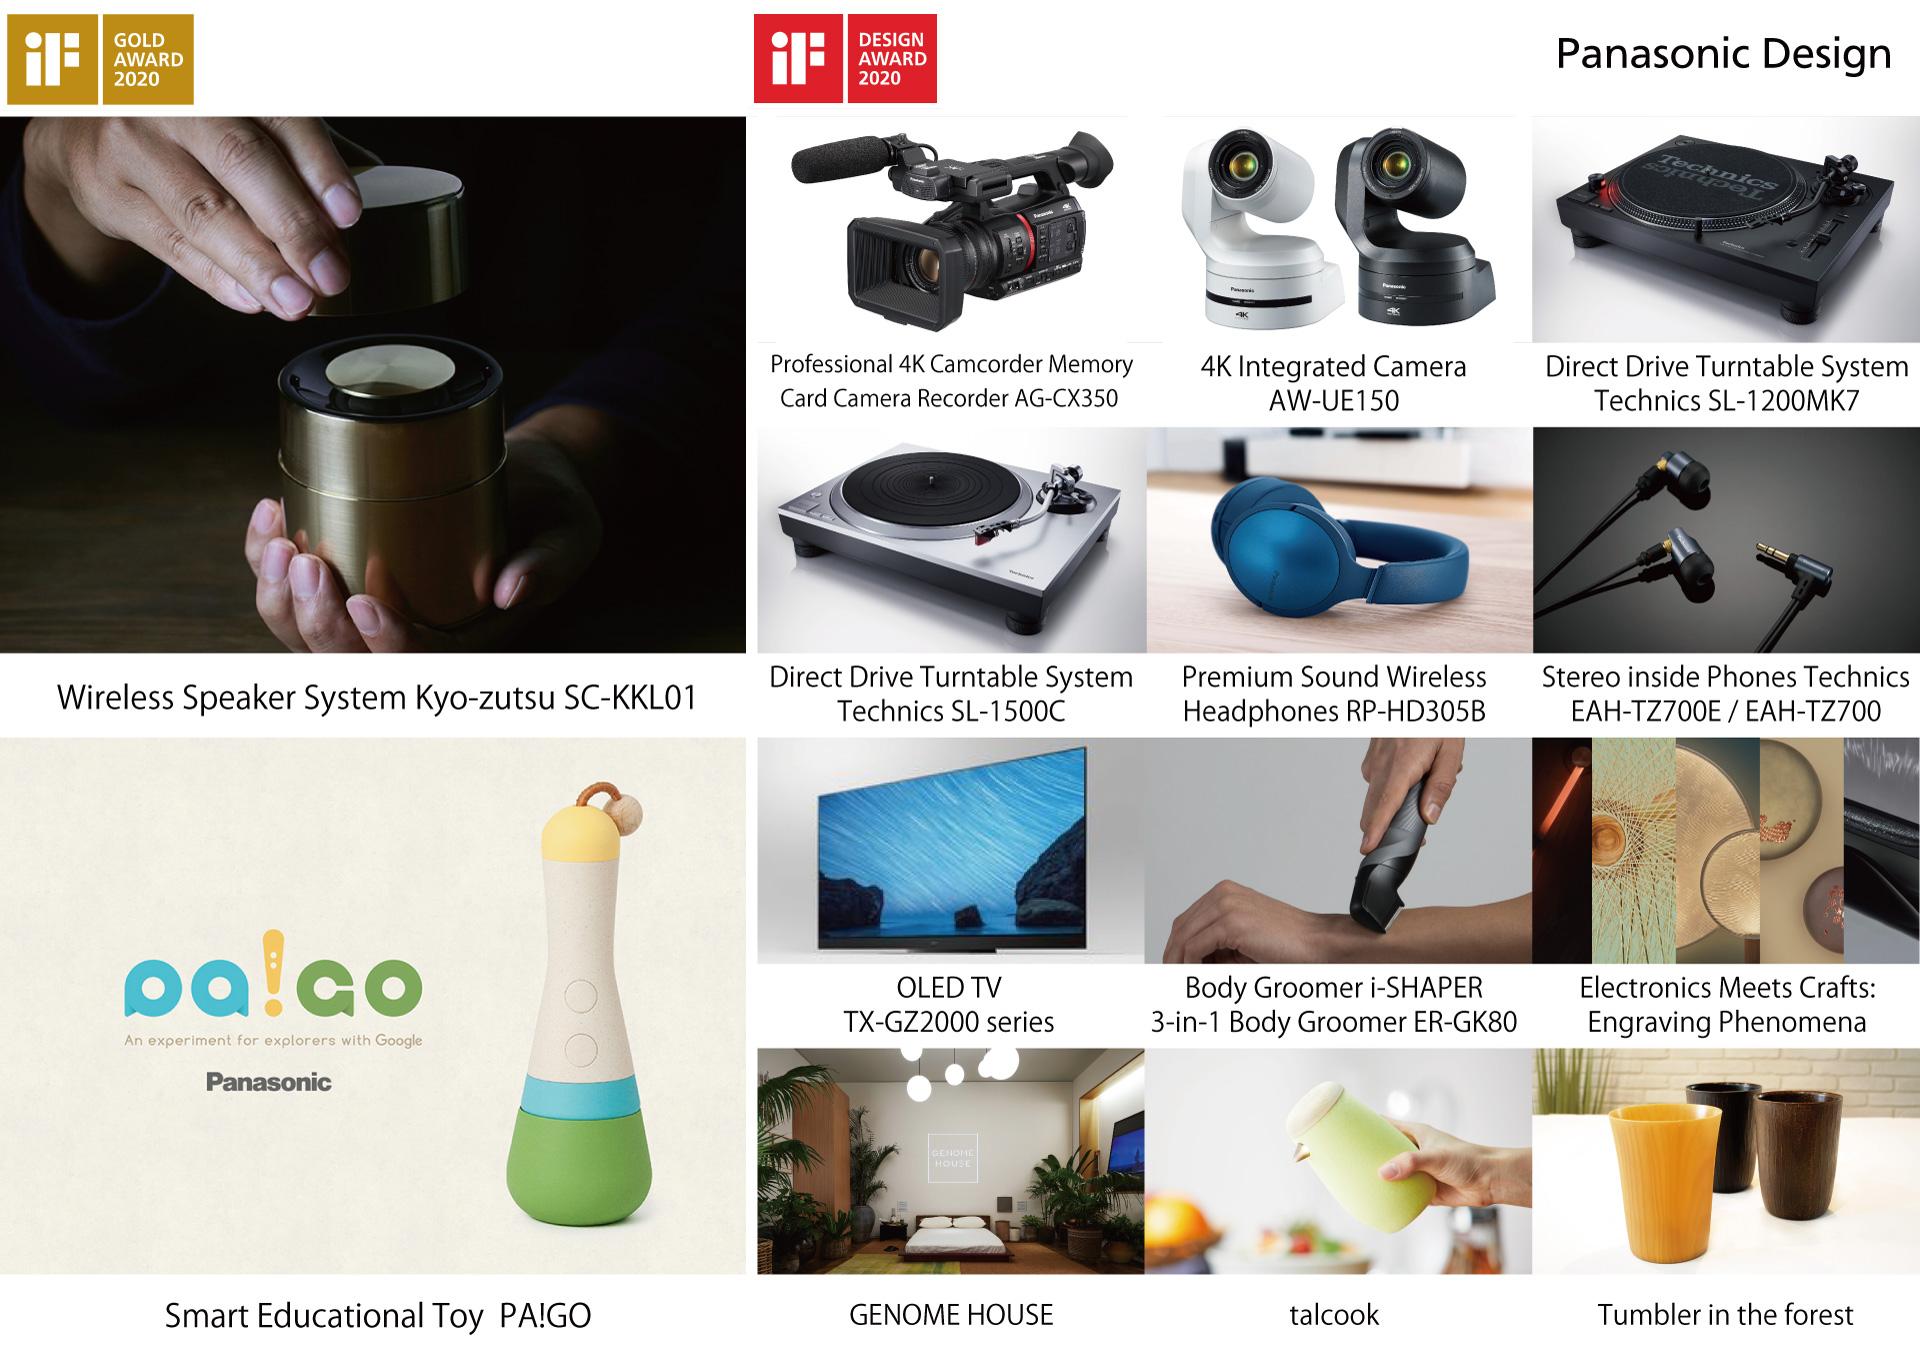 Image: Panasonic products and projects that received the iF DESIGN AWARD 2020